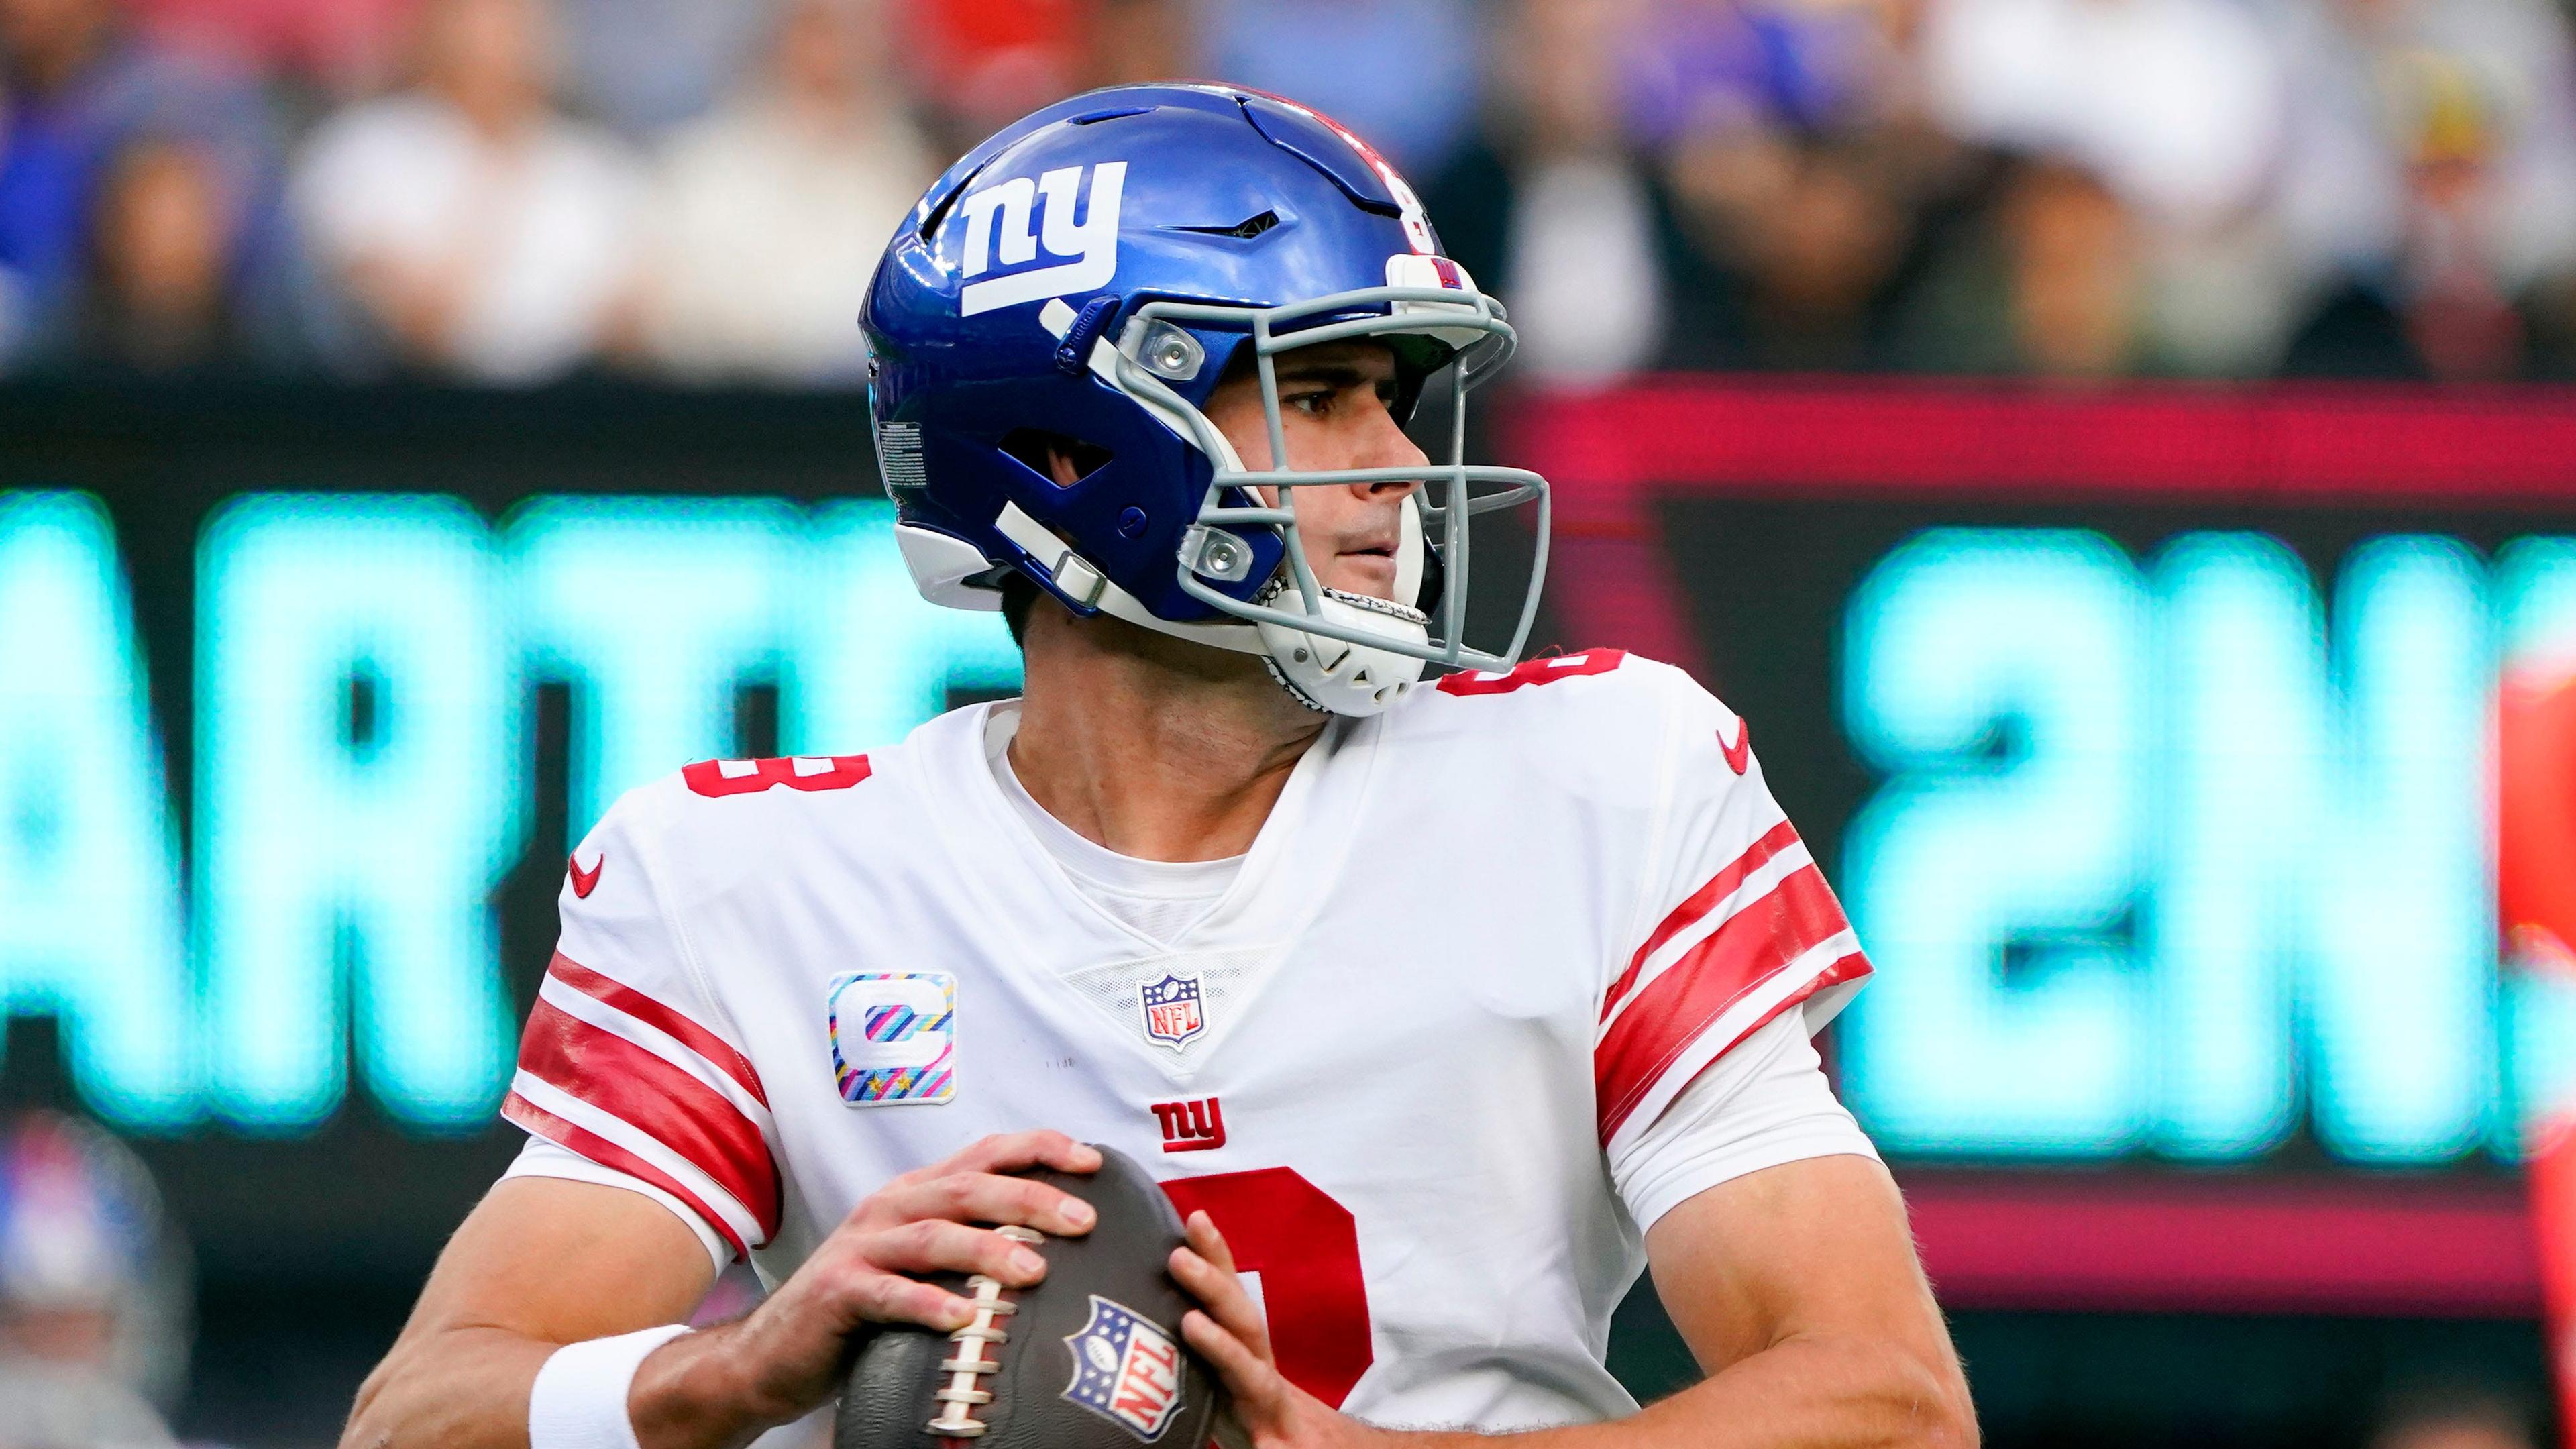 New York Giants quarterback Daniel Jones (8) looks to throw in the first half. The Giants fall to the Rams, 38-11, at MetLife Stadium on Sunday, Oct. 17, 2021, in East Rutherford / Danielle Parhizkaran/NorthJersey.com-Imagn Content Services, LLC